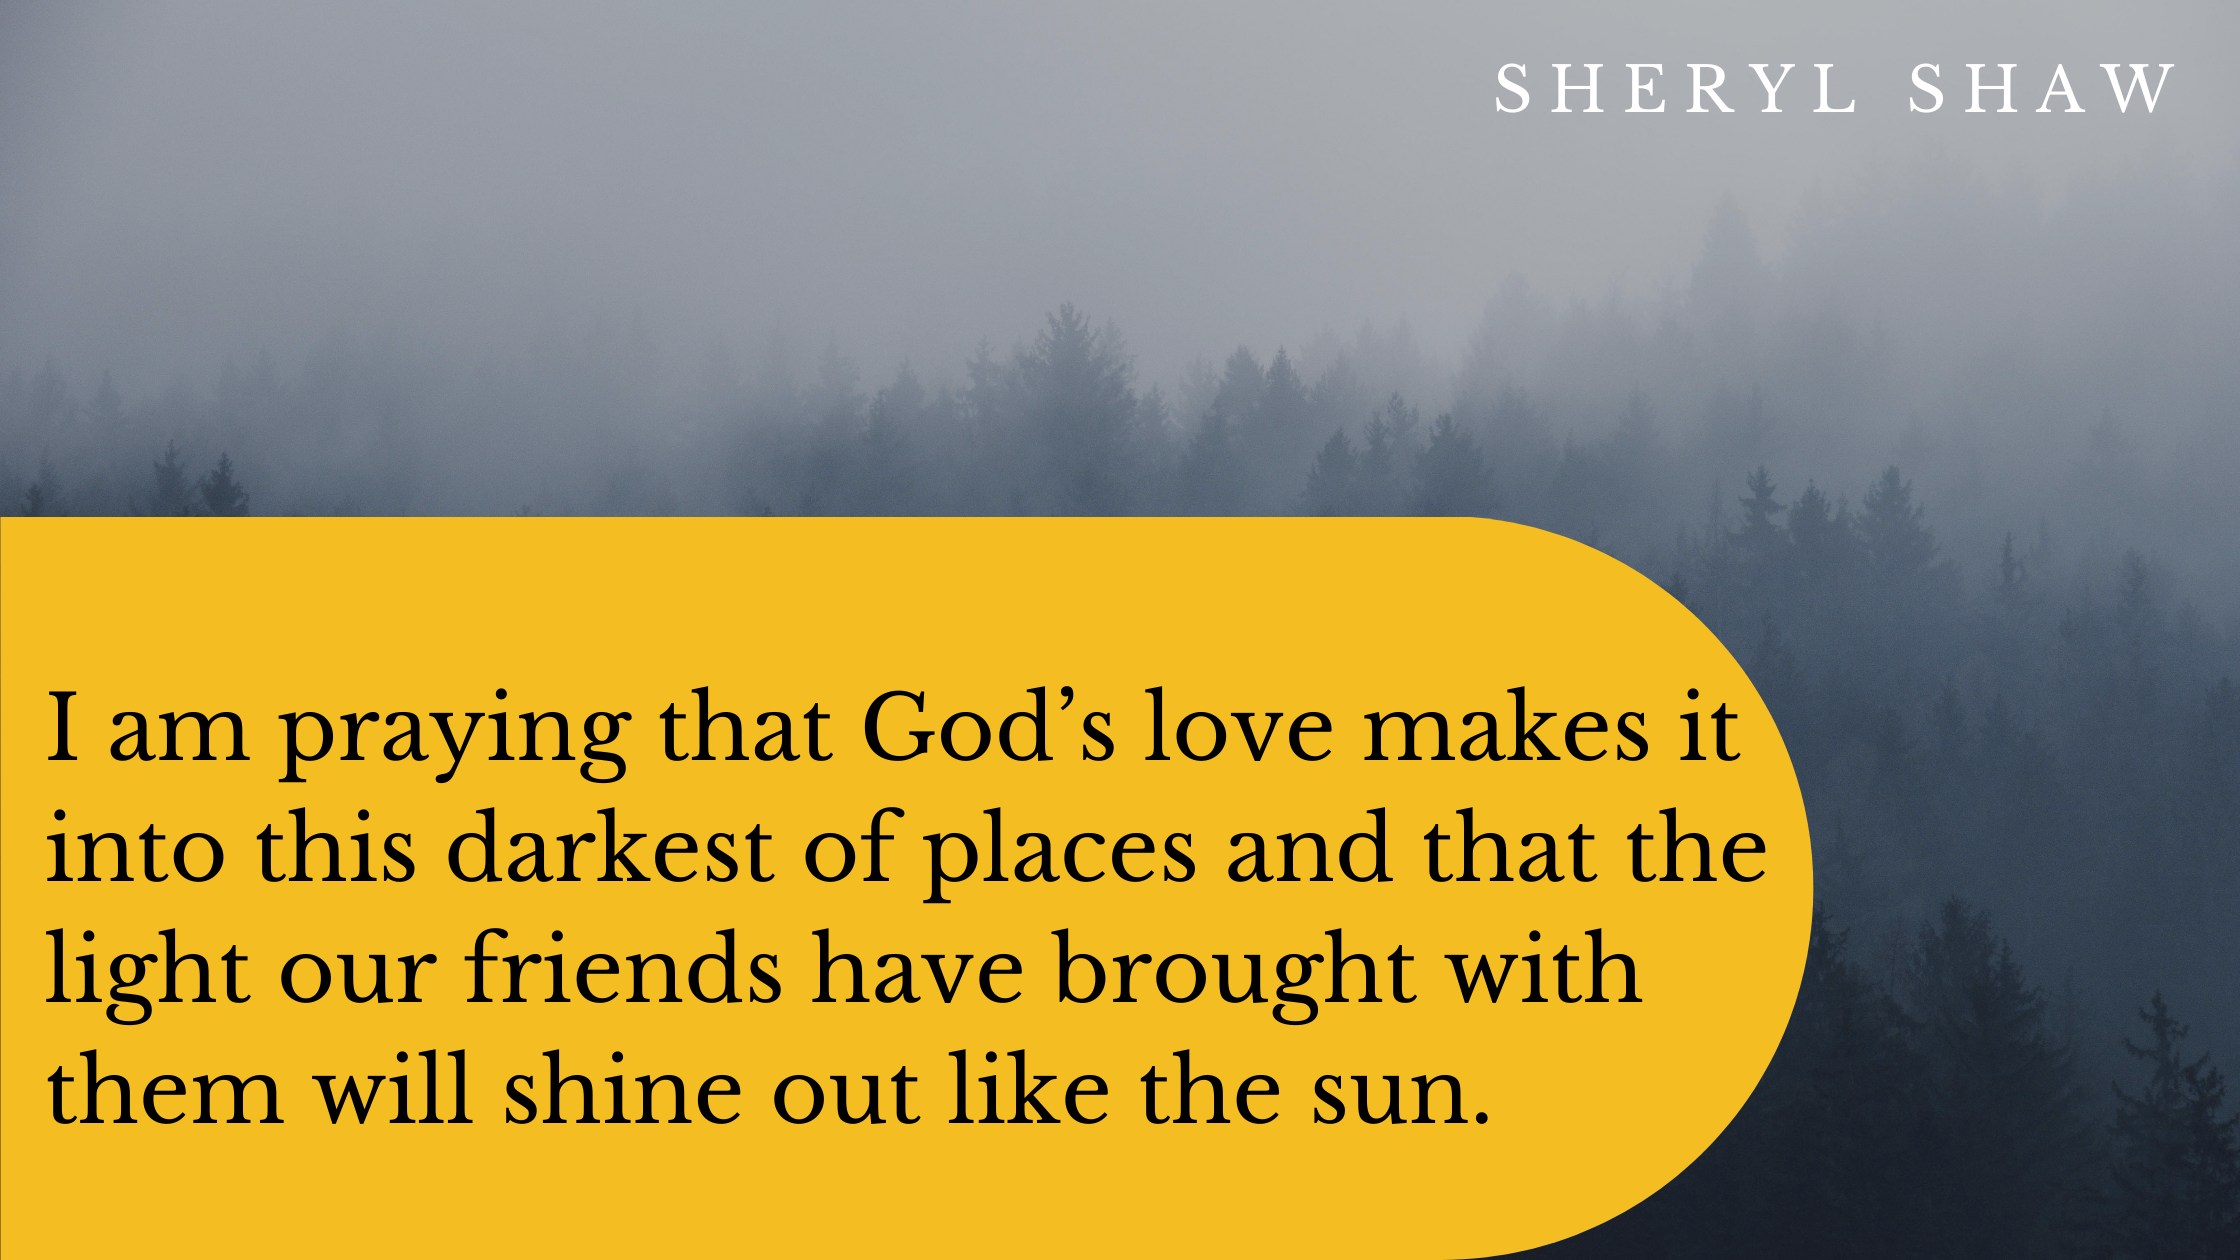 I am praying that God’s love makes it into this darkest of places and that the light our friends have brought with them will shine out like the sun.